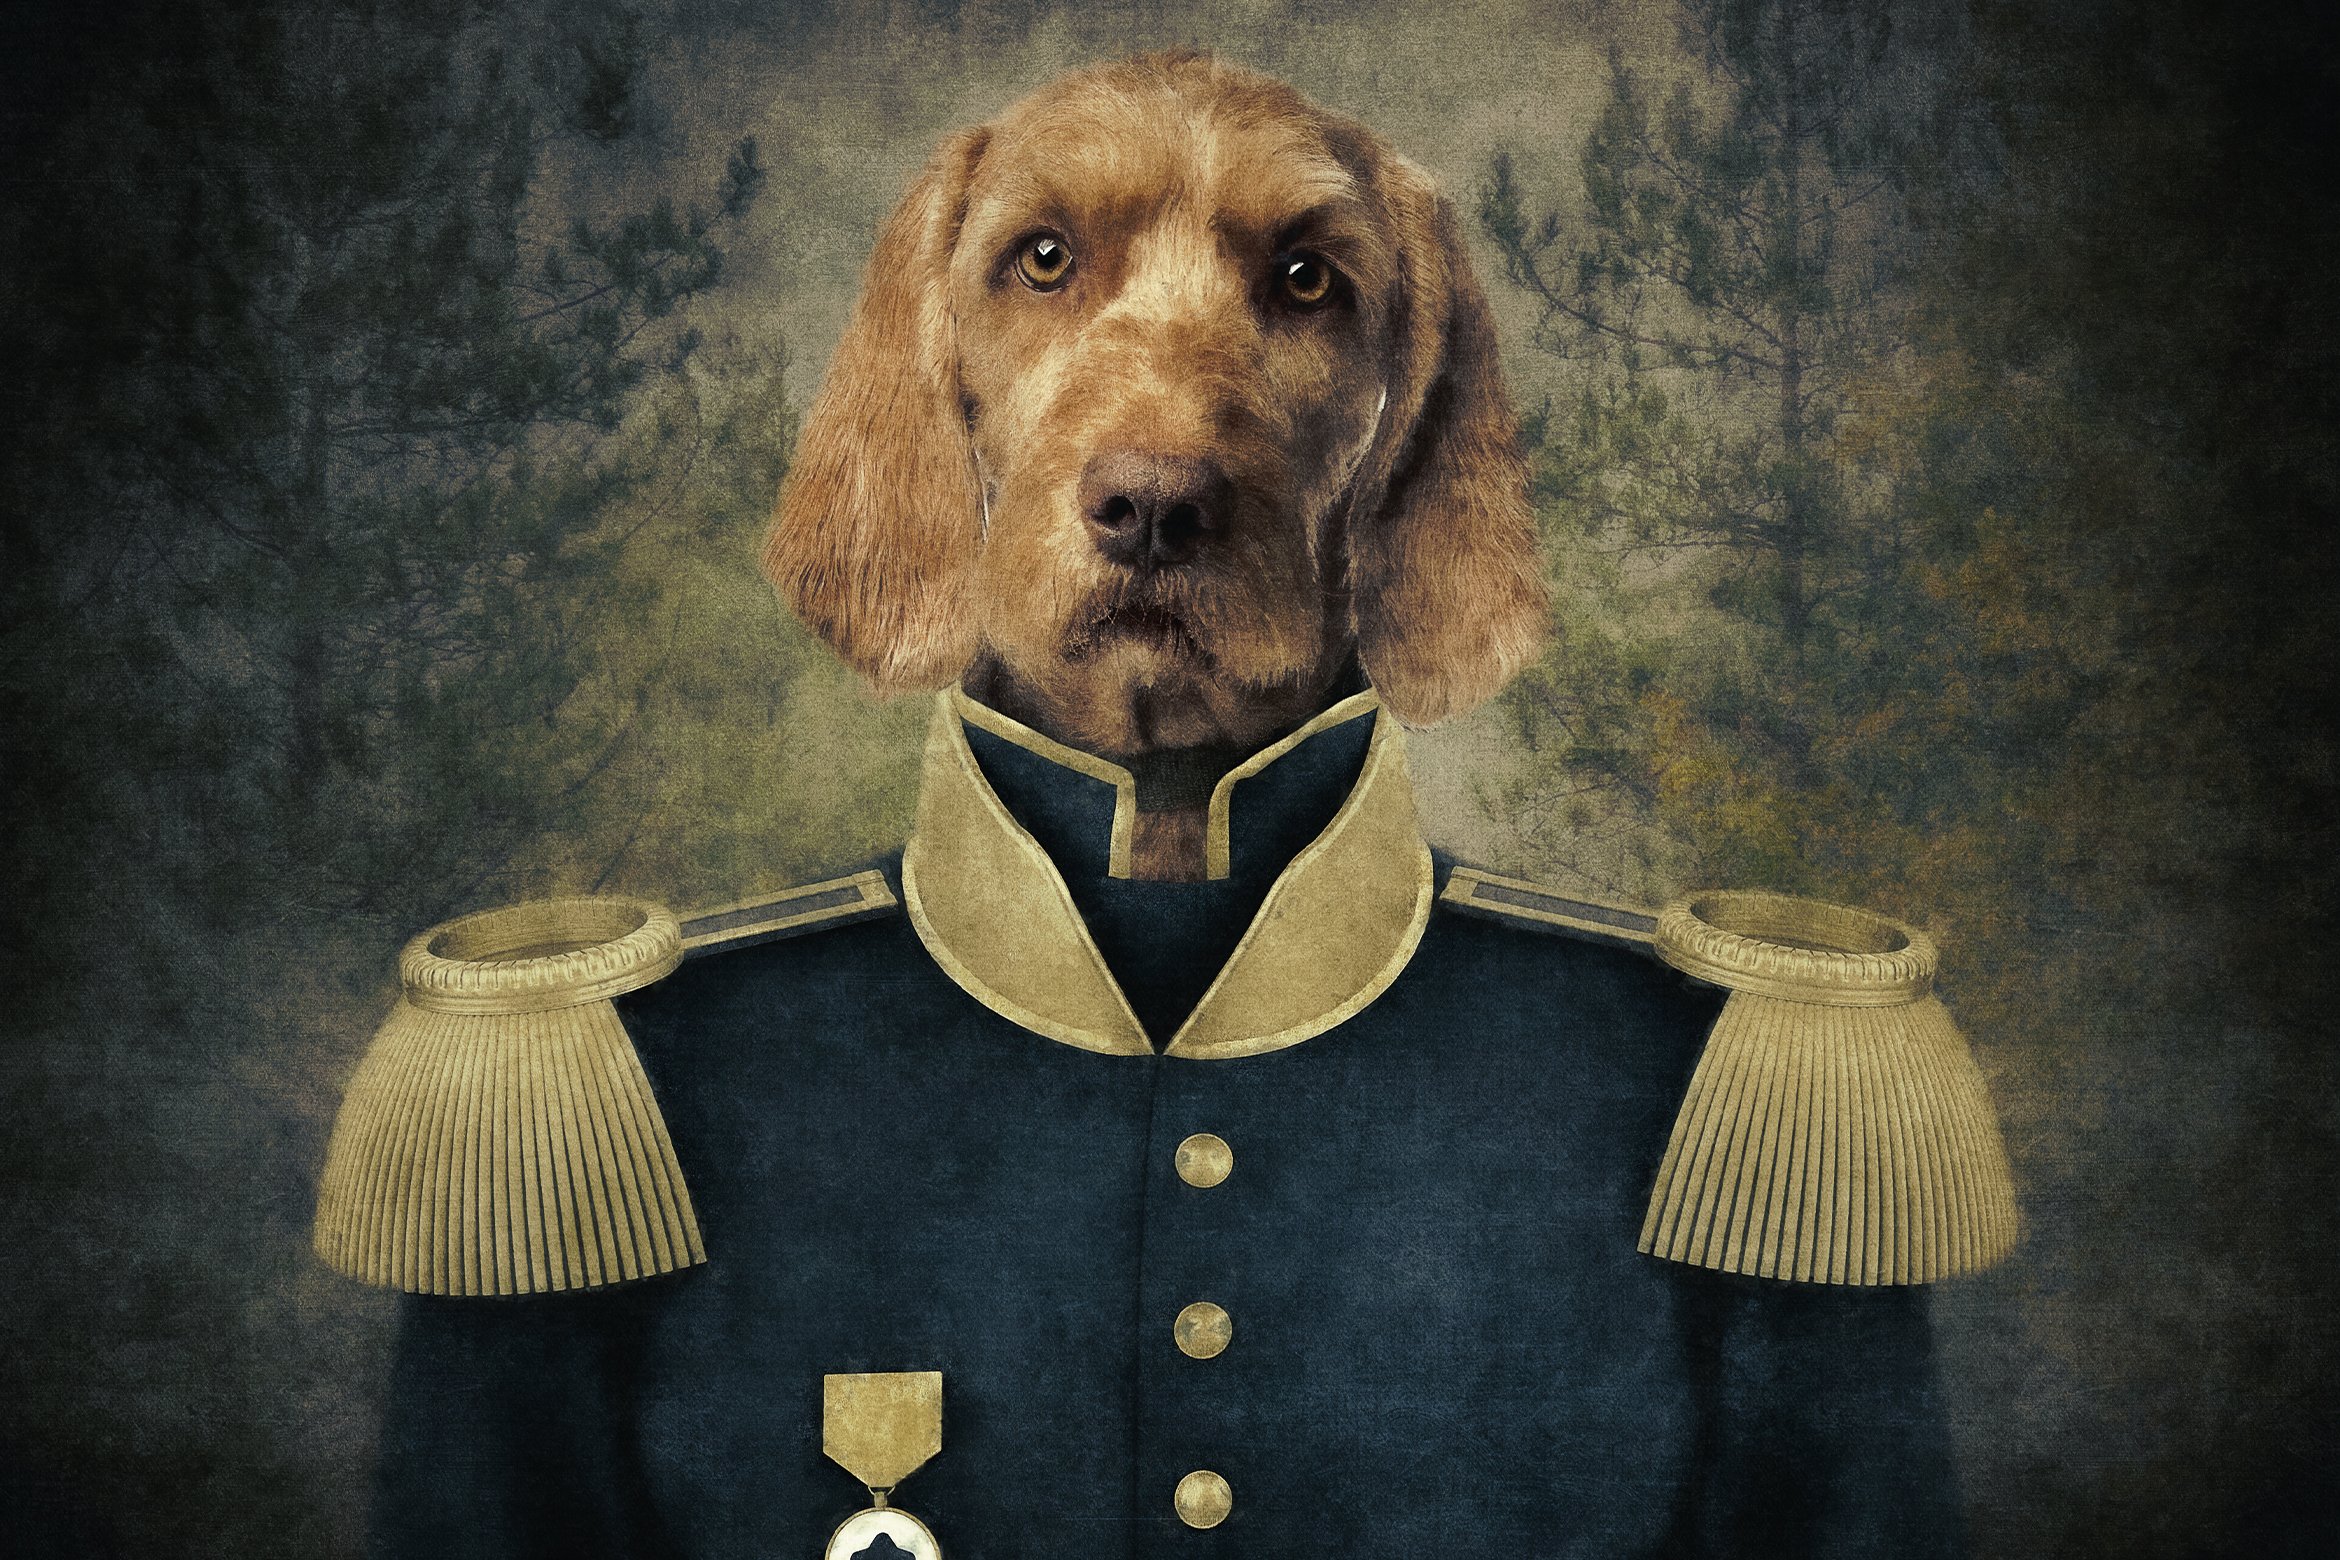 Dog General Photoshop Actioncover image.